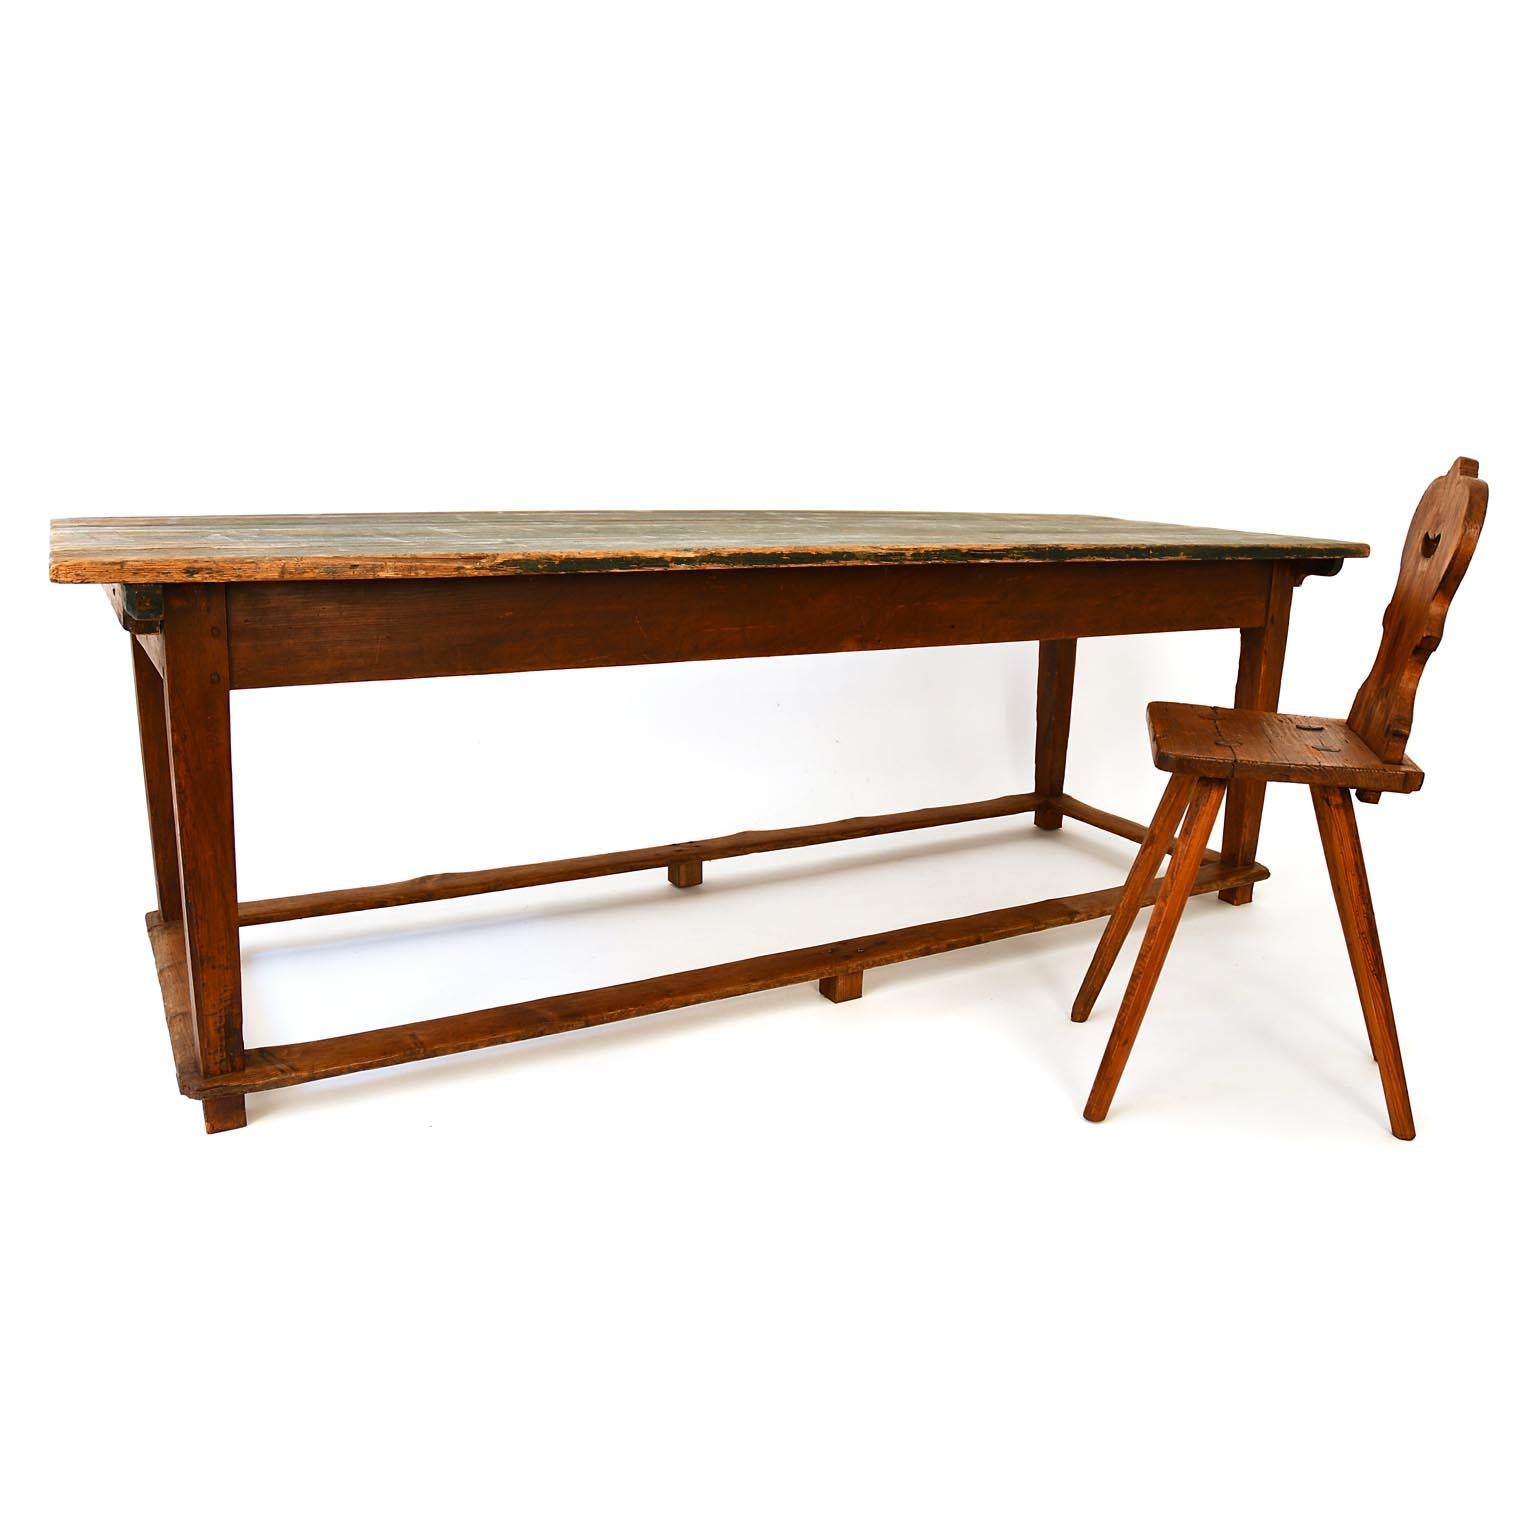 Other Refectory Table Softwood Top with Green Patina Early 20th Century France For Sale